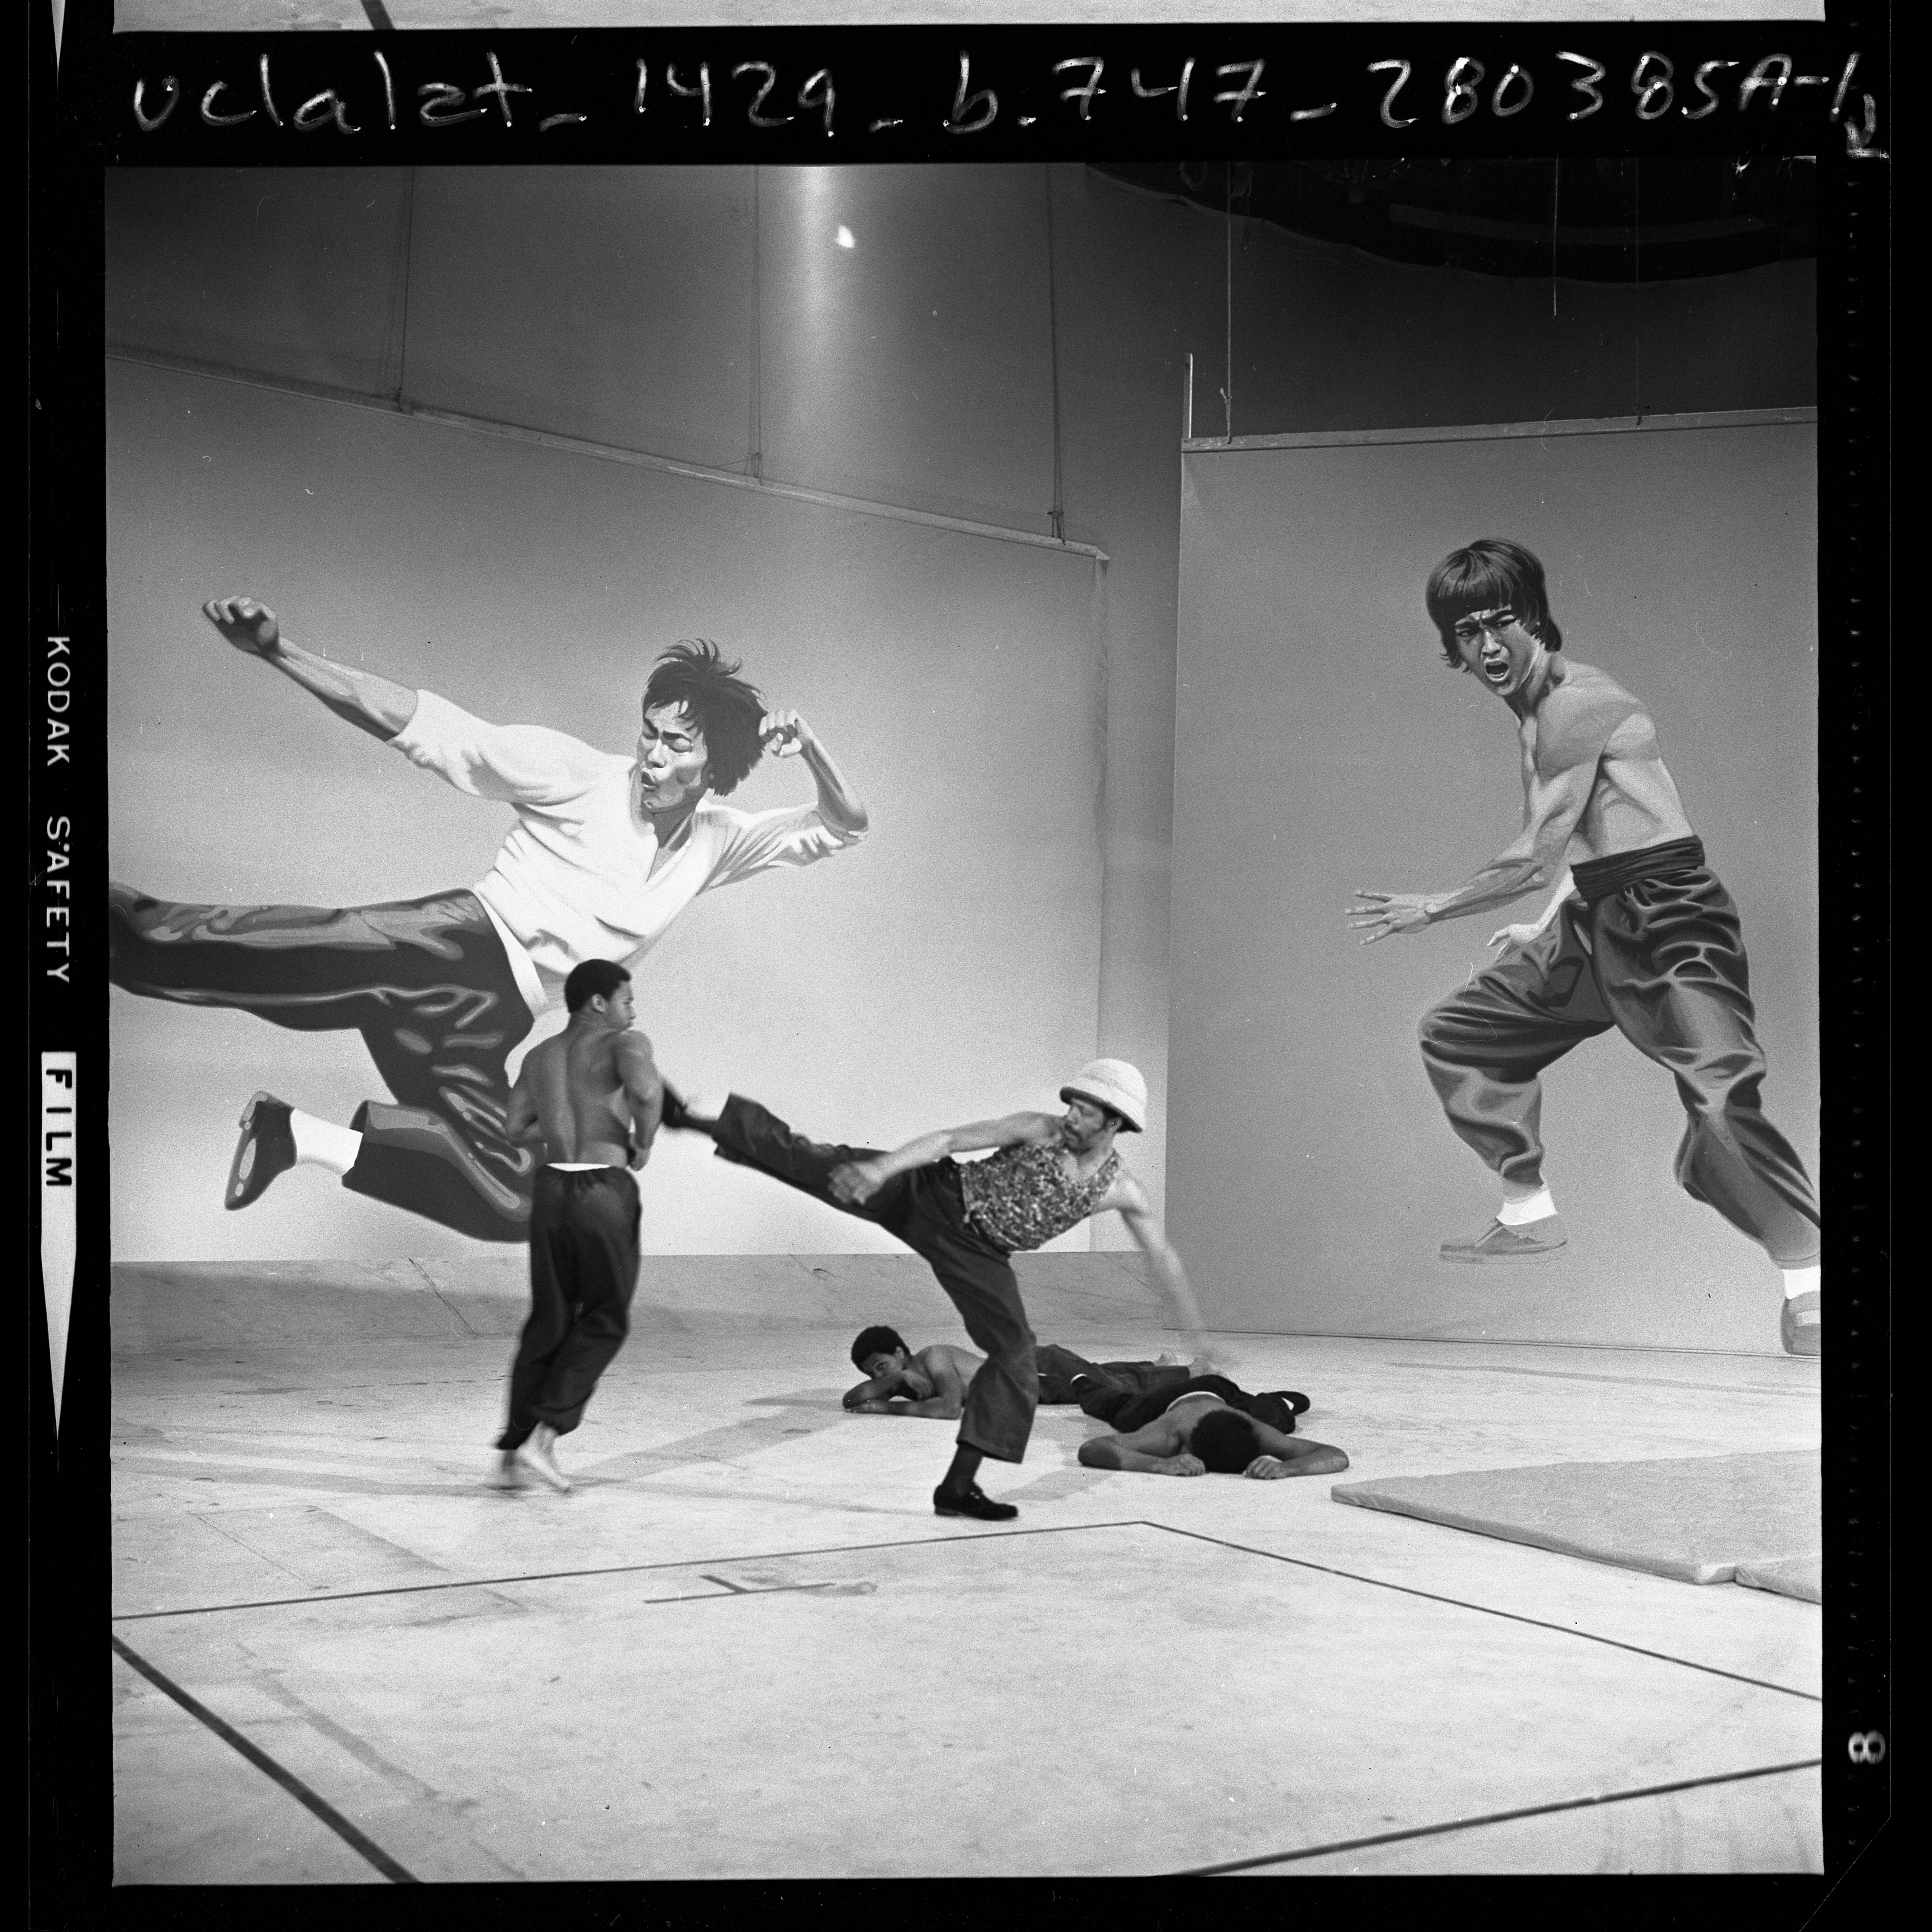 Image of four men performing karate before backdrops with images of Bruce Lee during audition